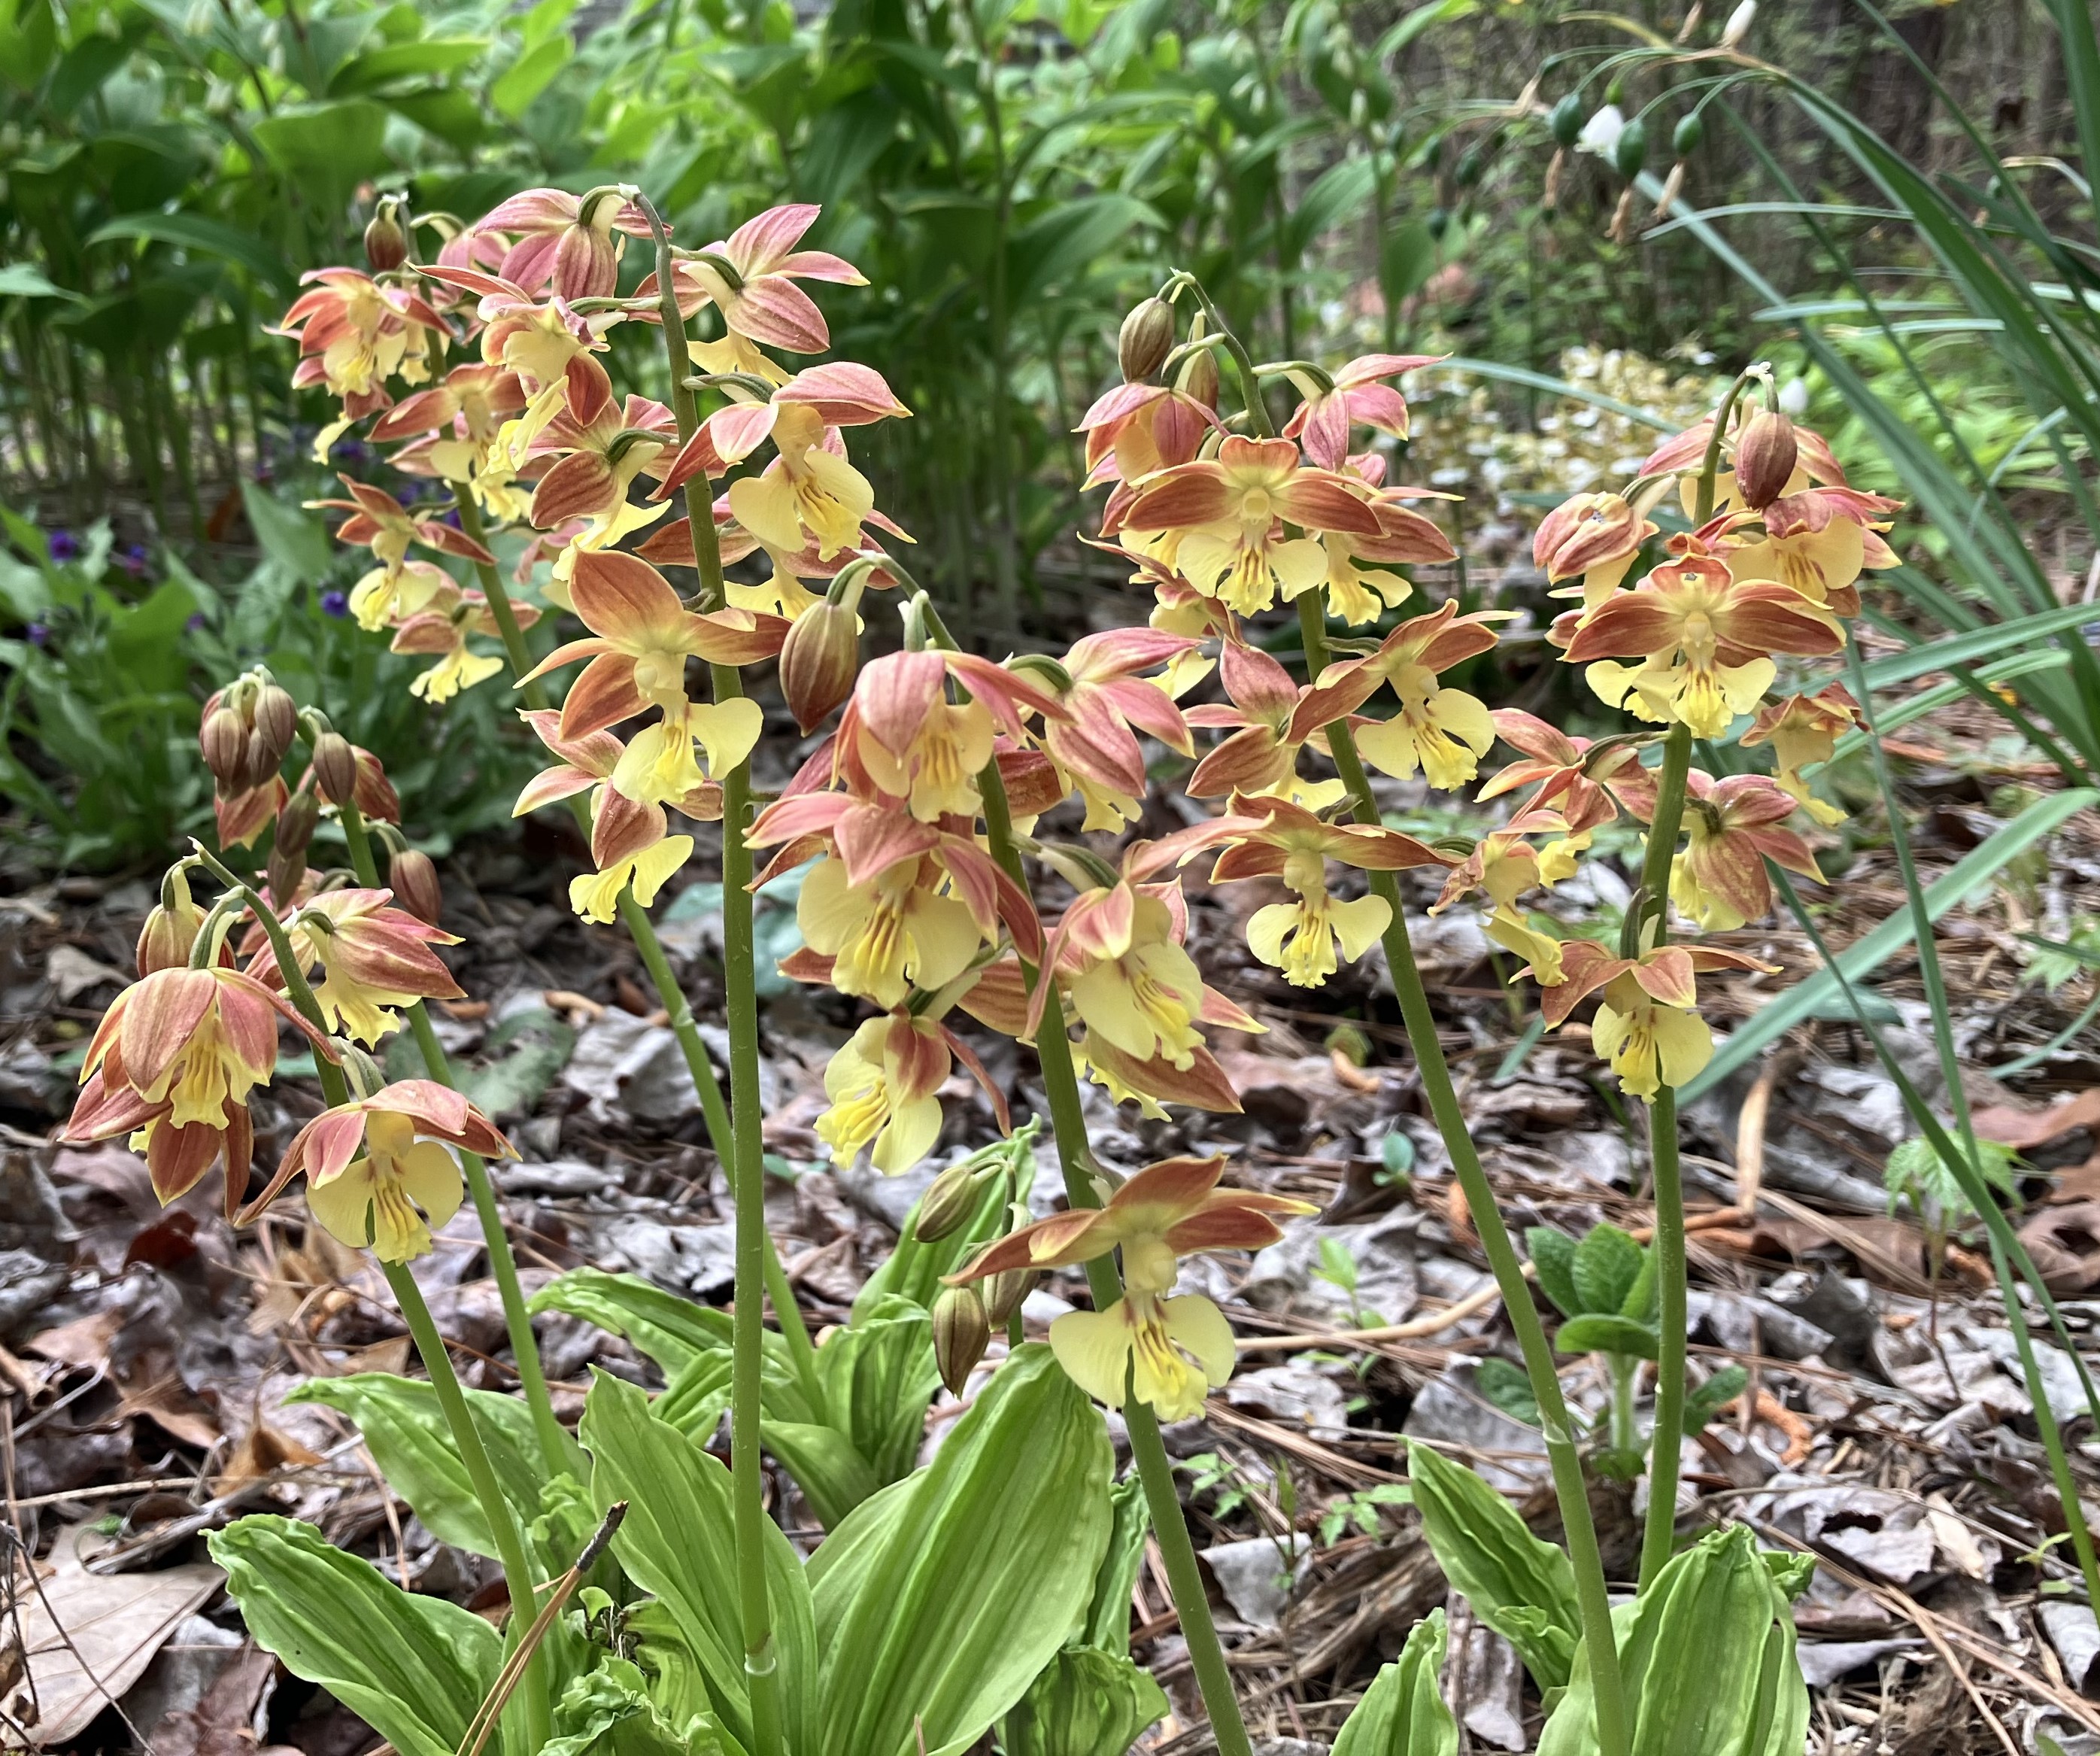 A Calanthe orchid with flower spikes emerging from fresh, green pleated leaves. The flowers have a yellow lip and brick red sepals and petals